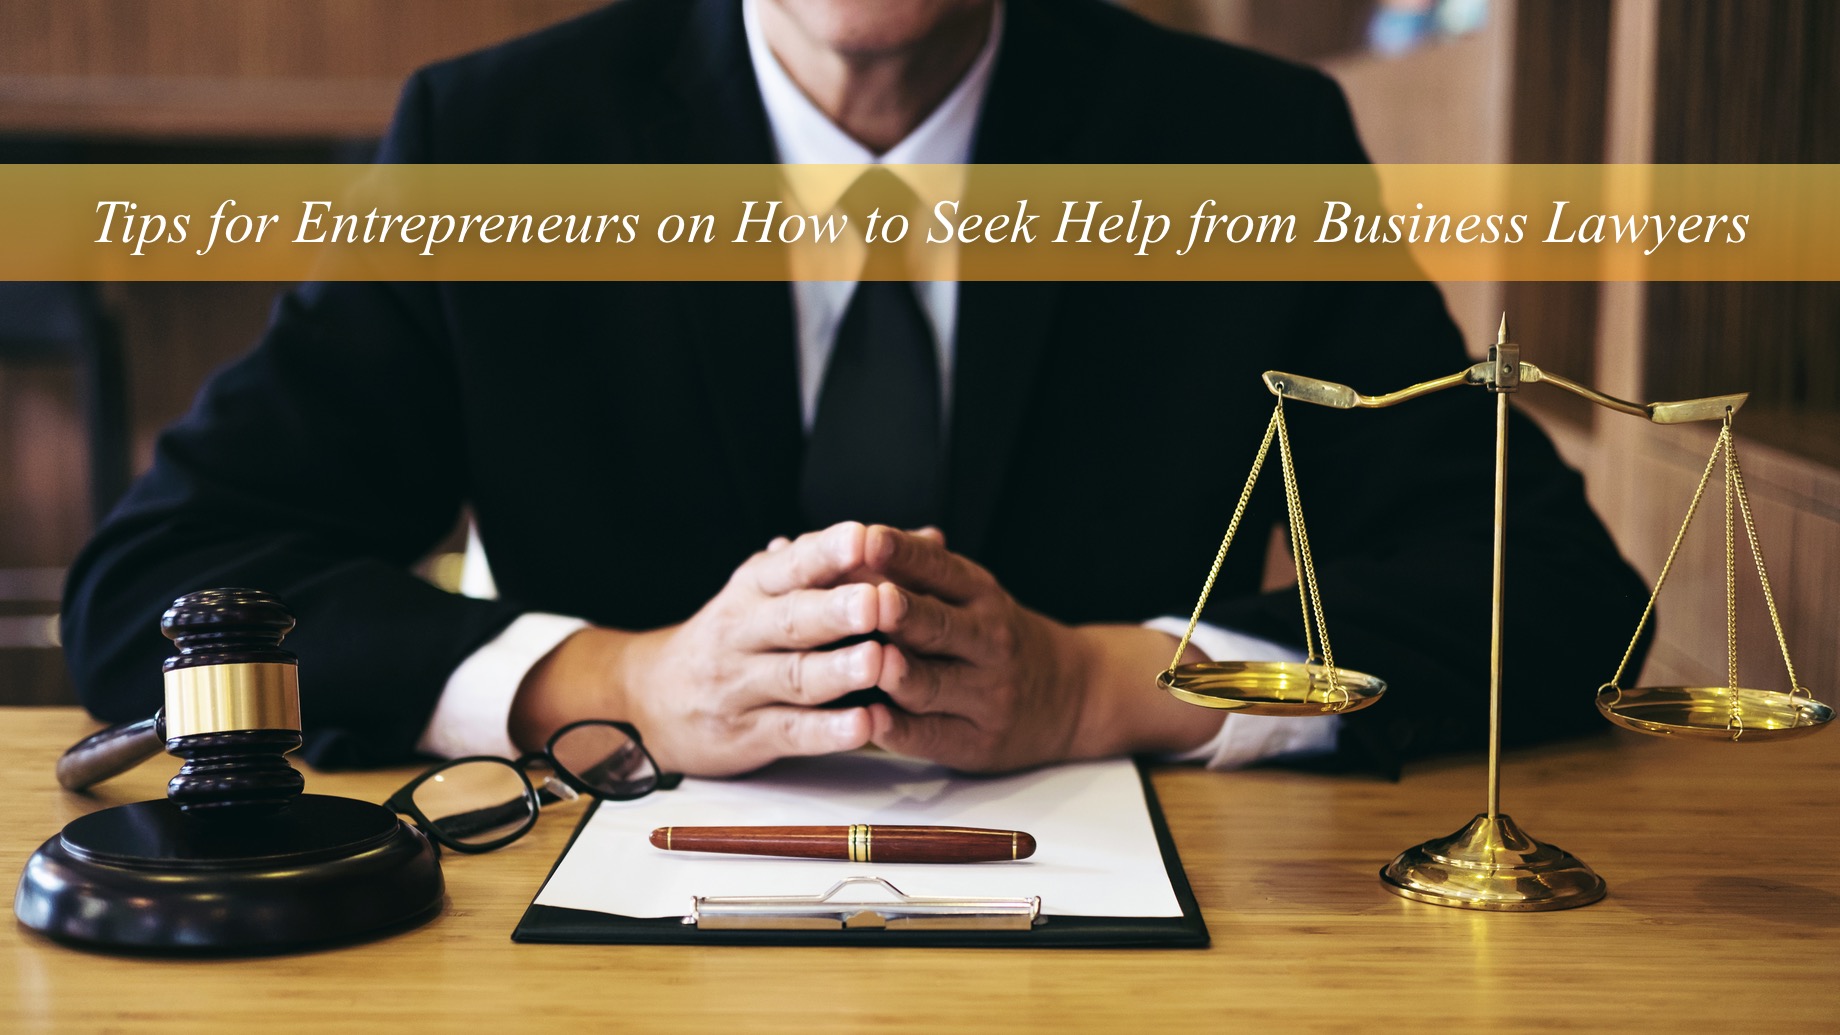 Tips for Entrepreneurs on How to Seek Help from Business Lawyers